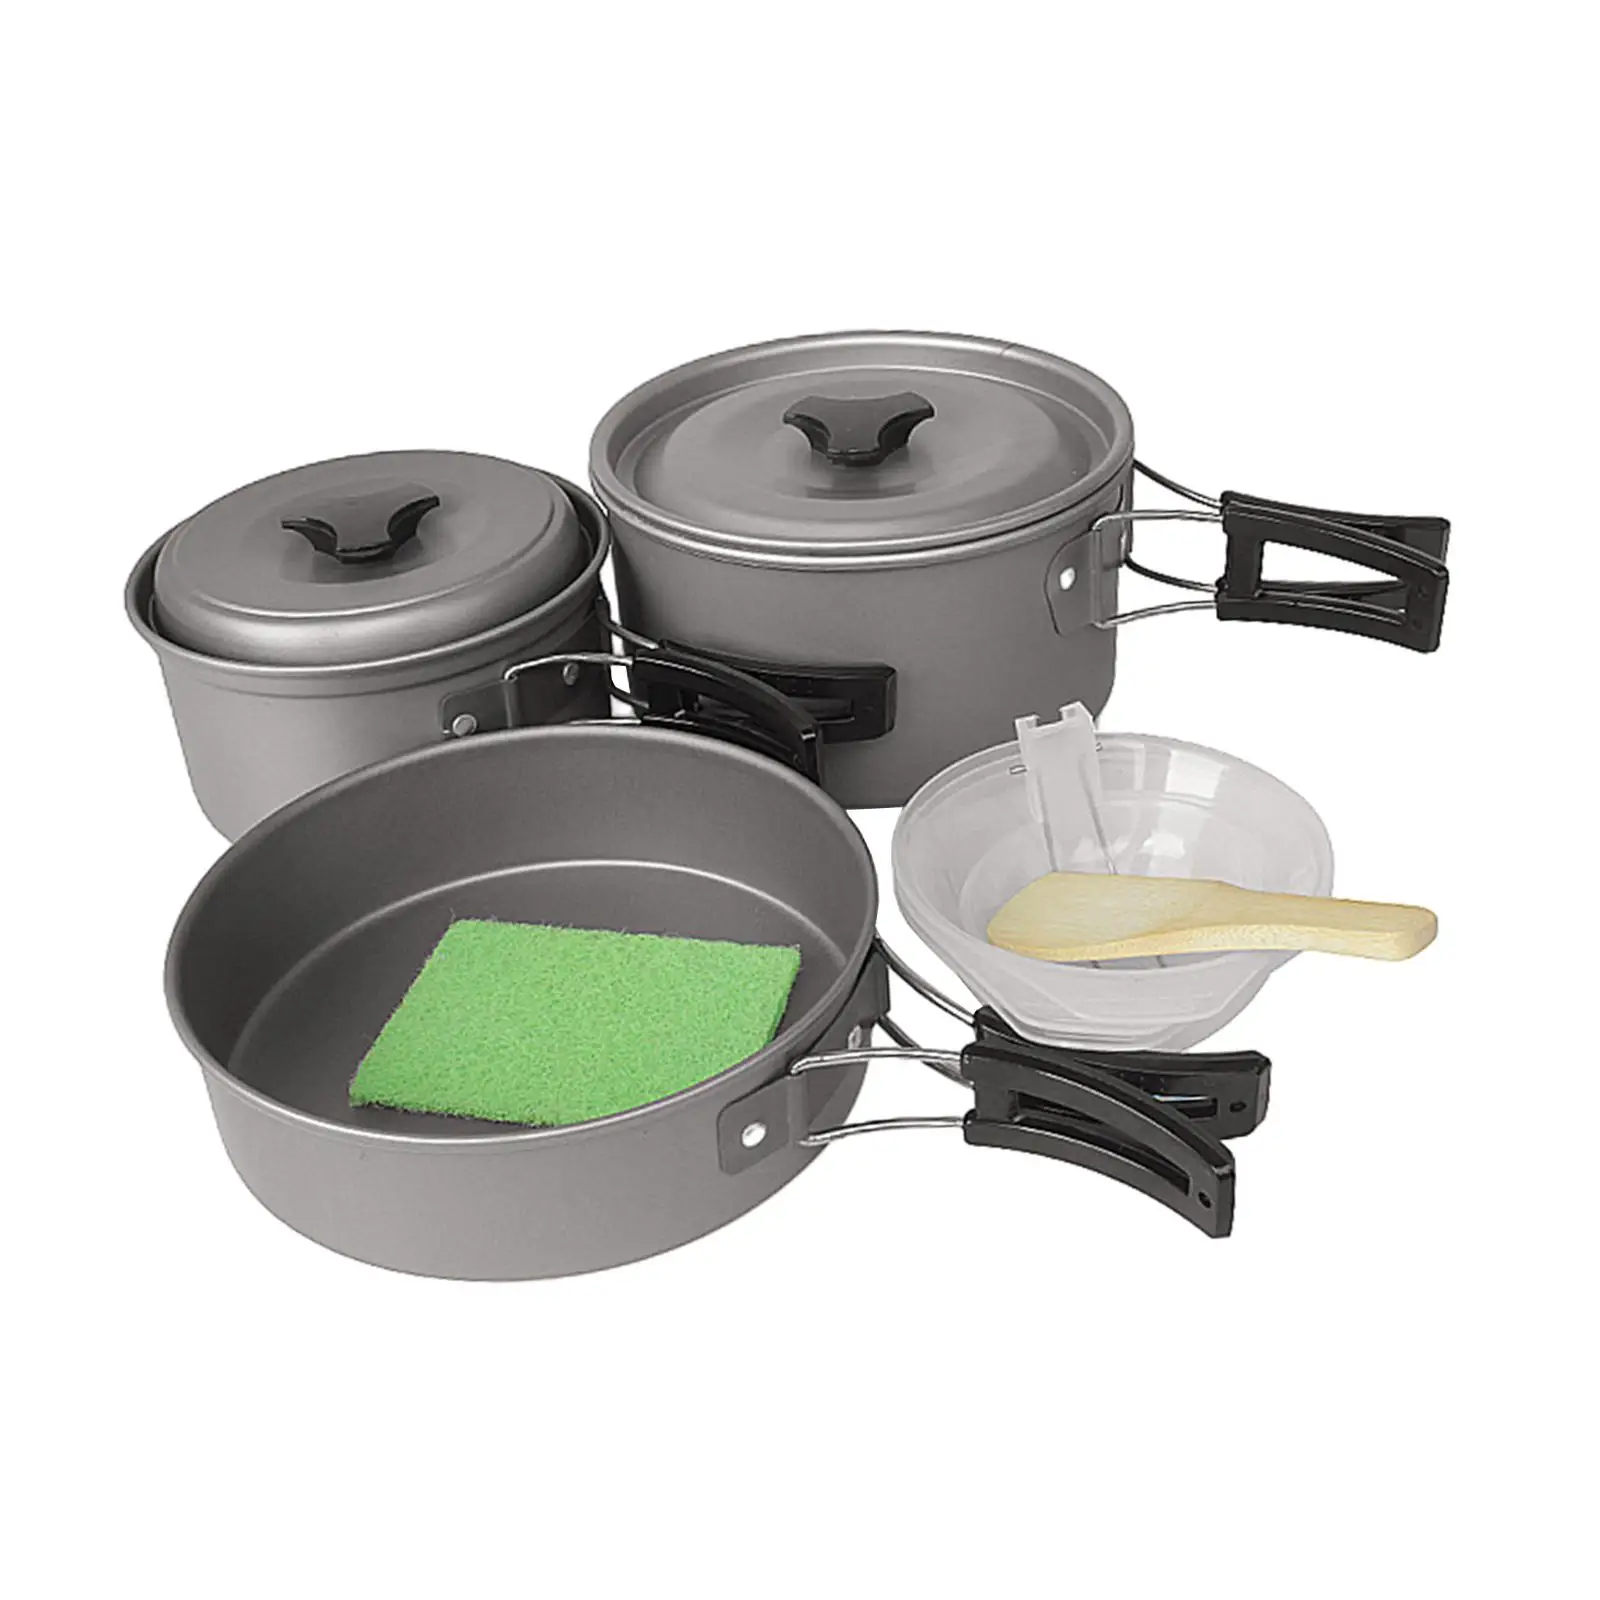 Camping Cookware Set Lightweight Pot and Pan for Outdoor Hiking Picnic